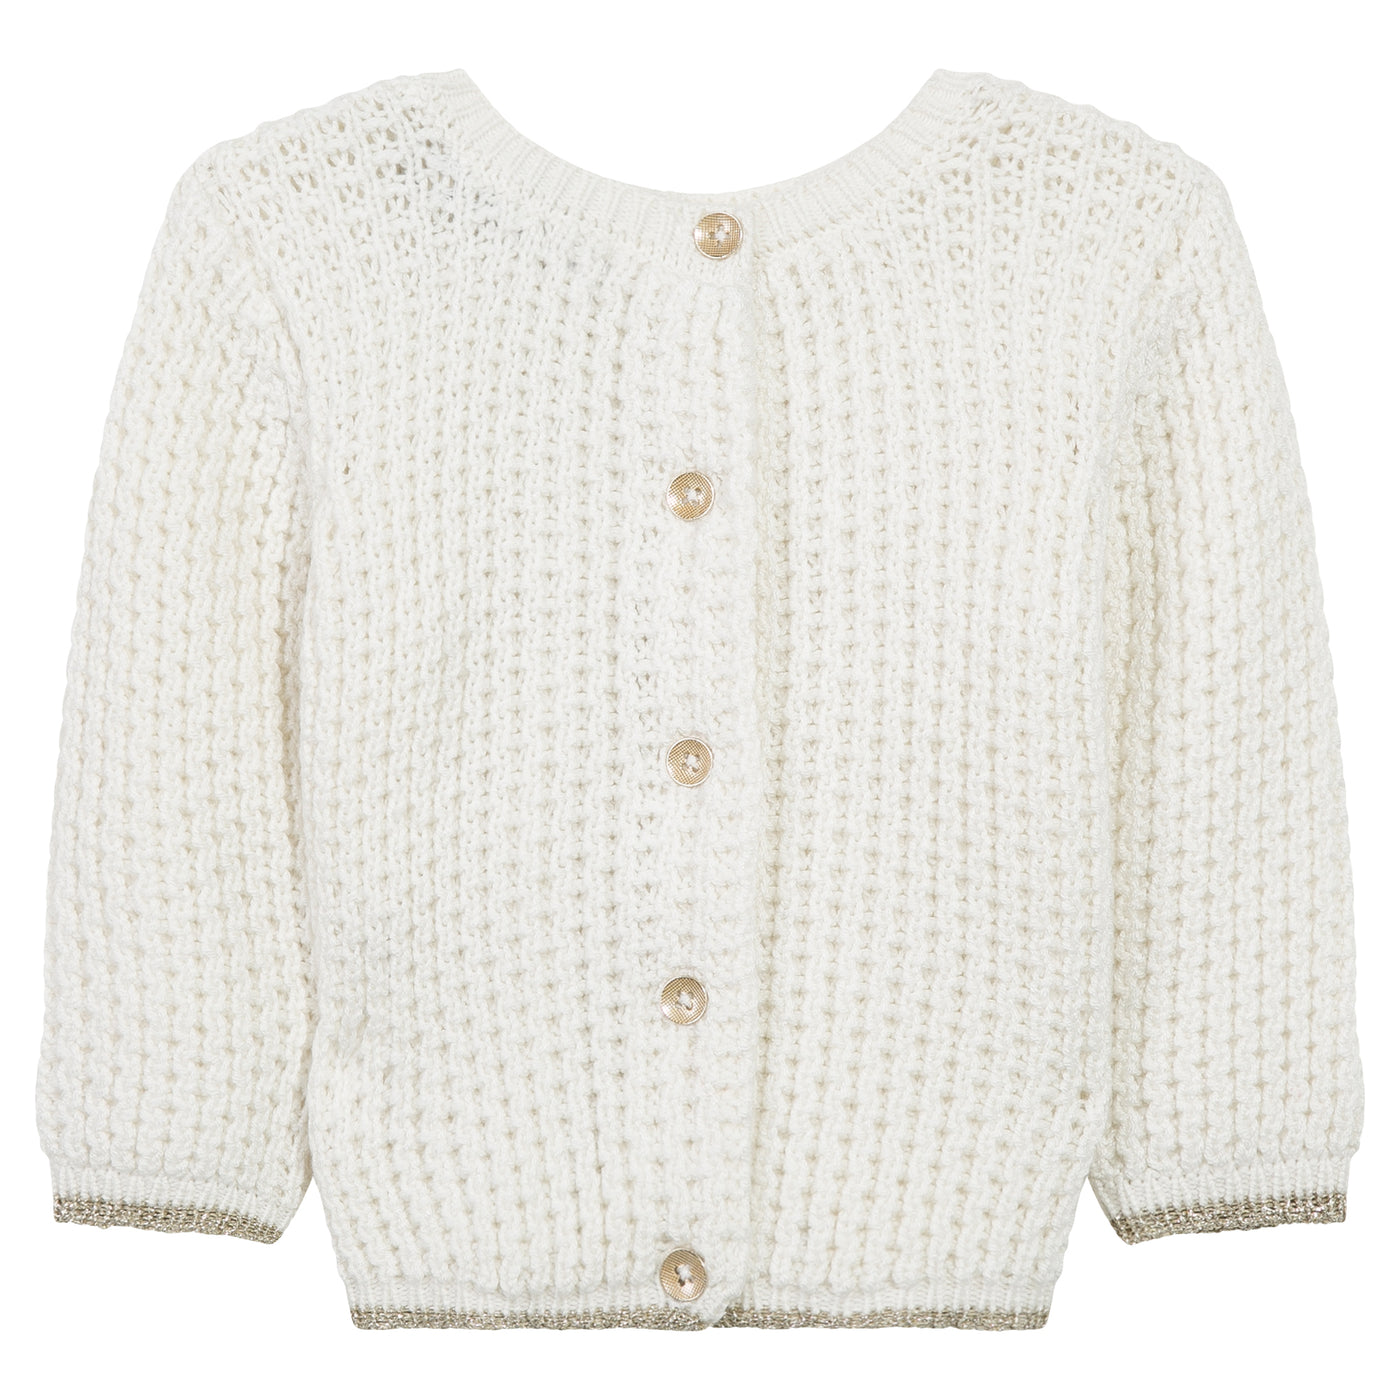 Jean Bourget Baby's White Cream Knitted Cardigan